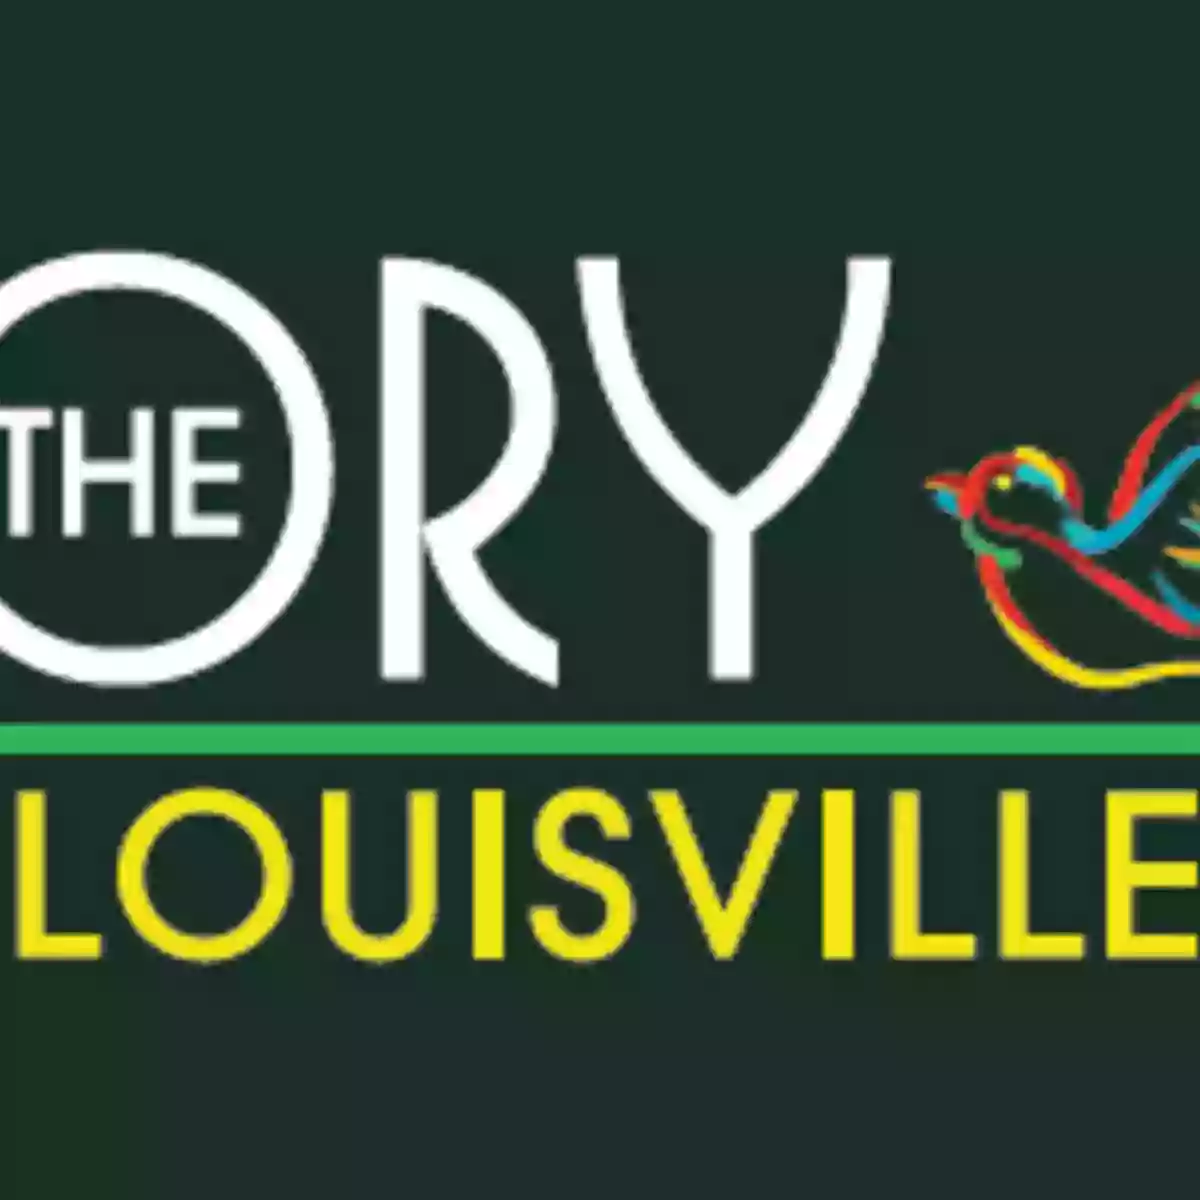 The Lory of Louisville